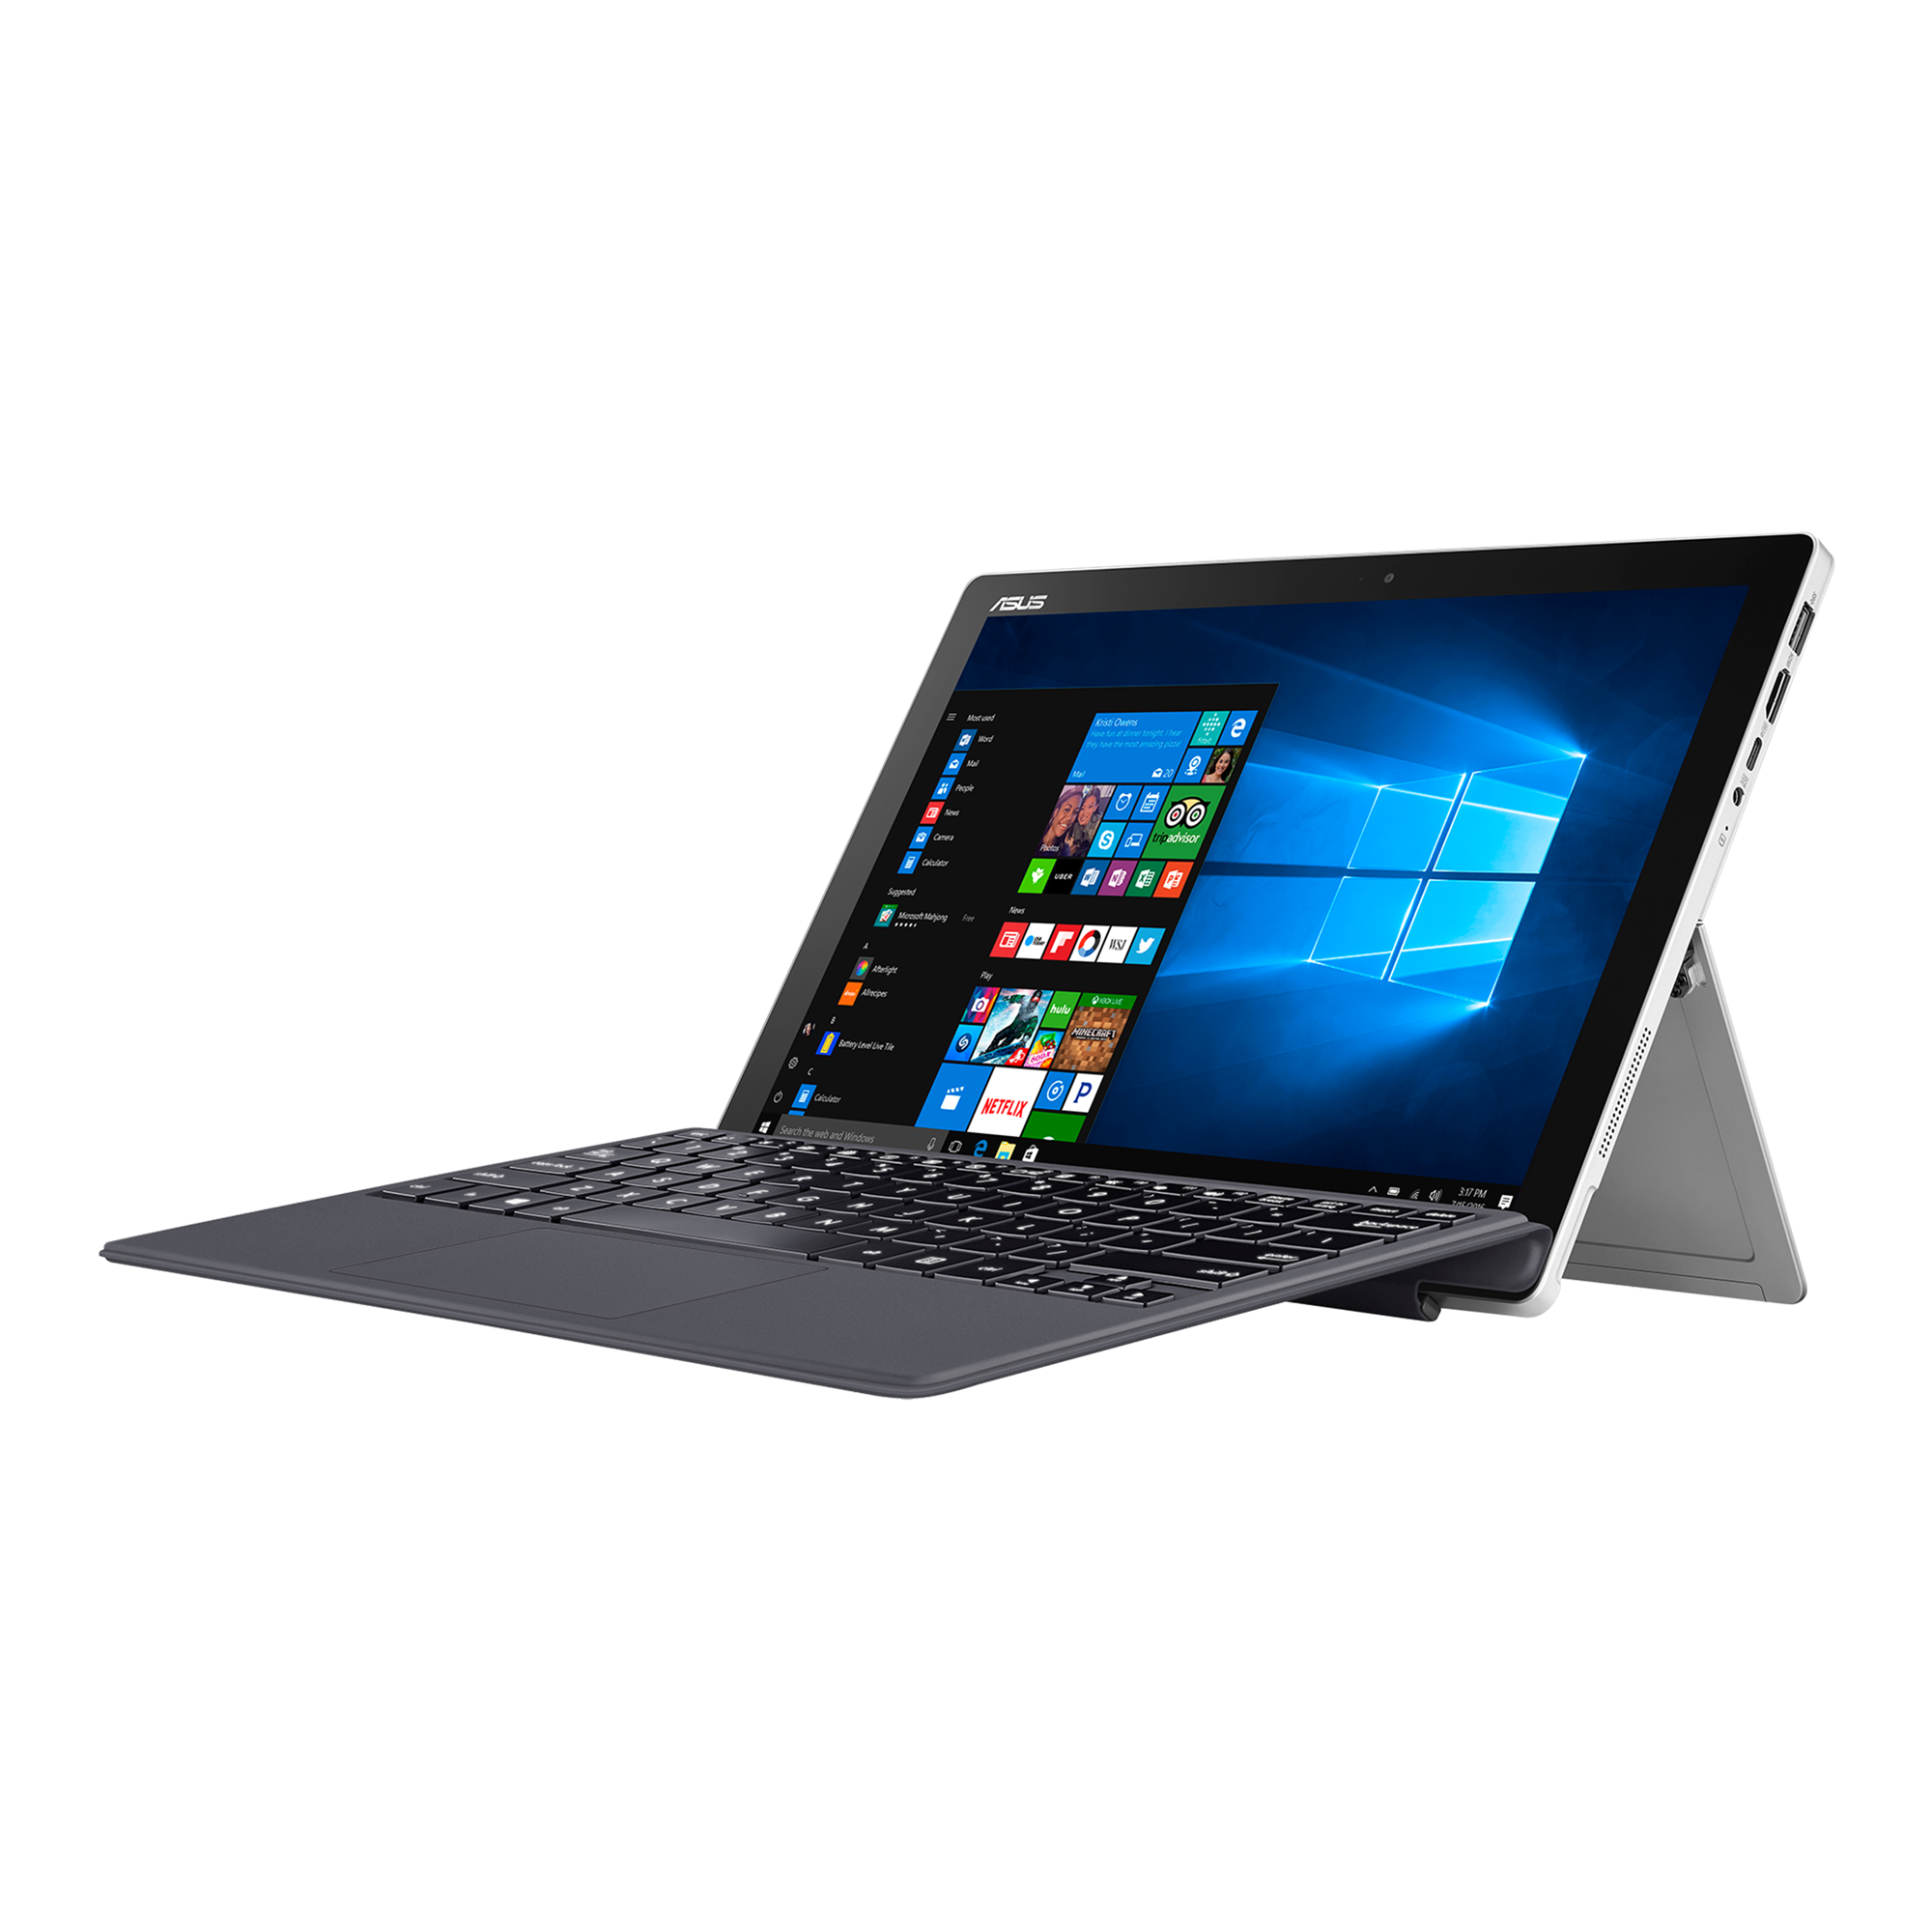 ASUS Transformer Pro T304｜Laptops For Students｜ASUS USA